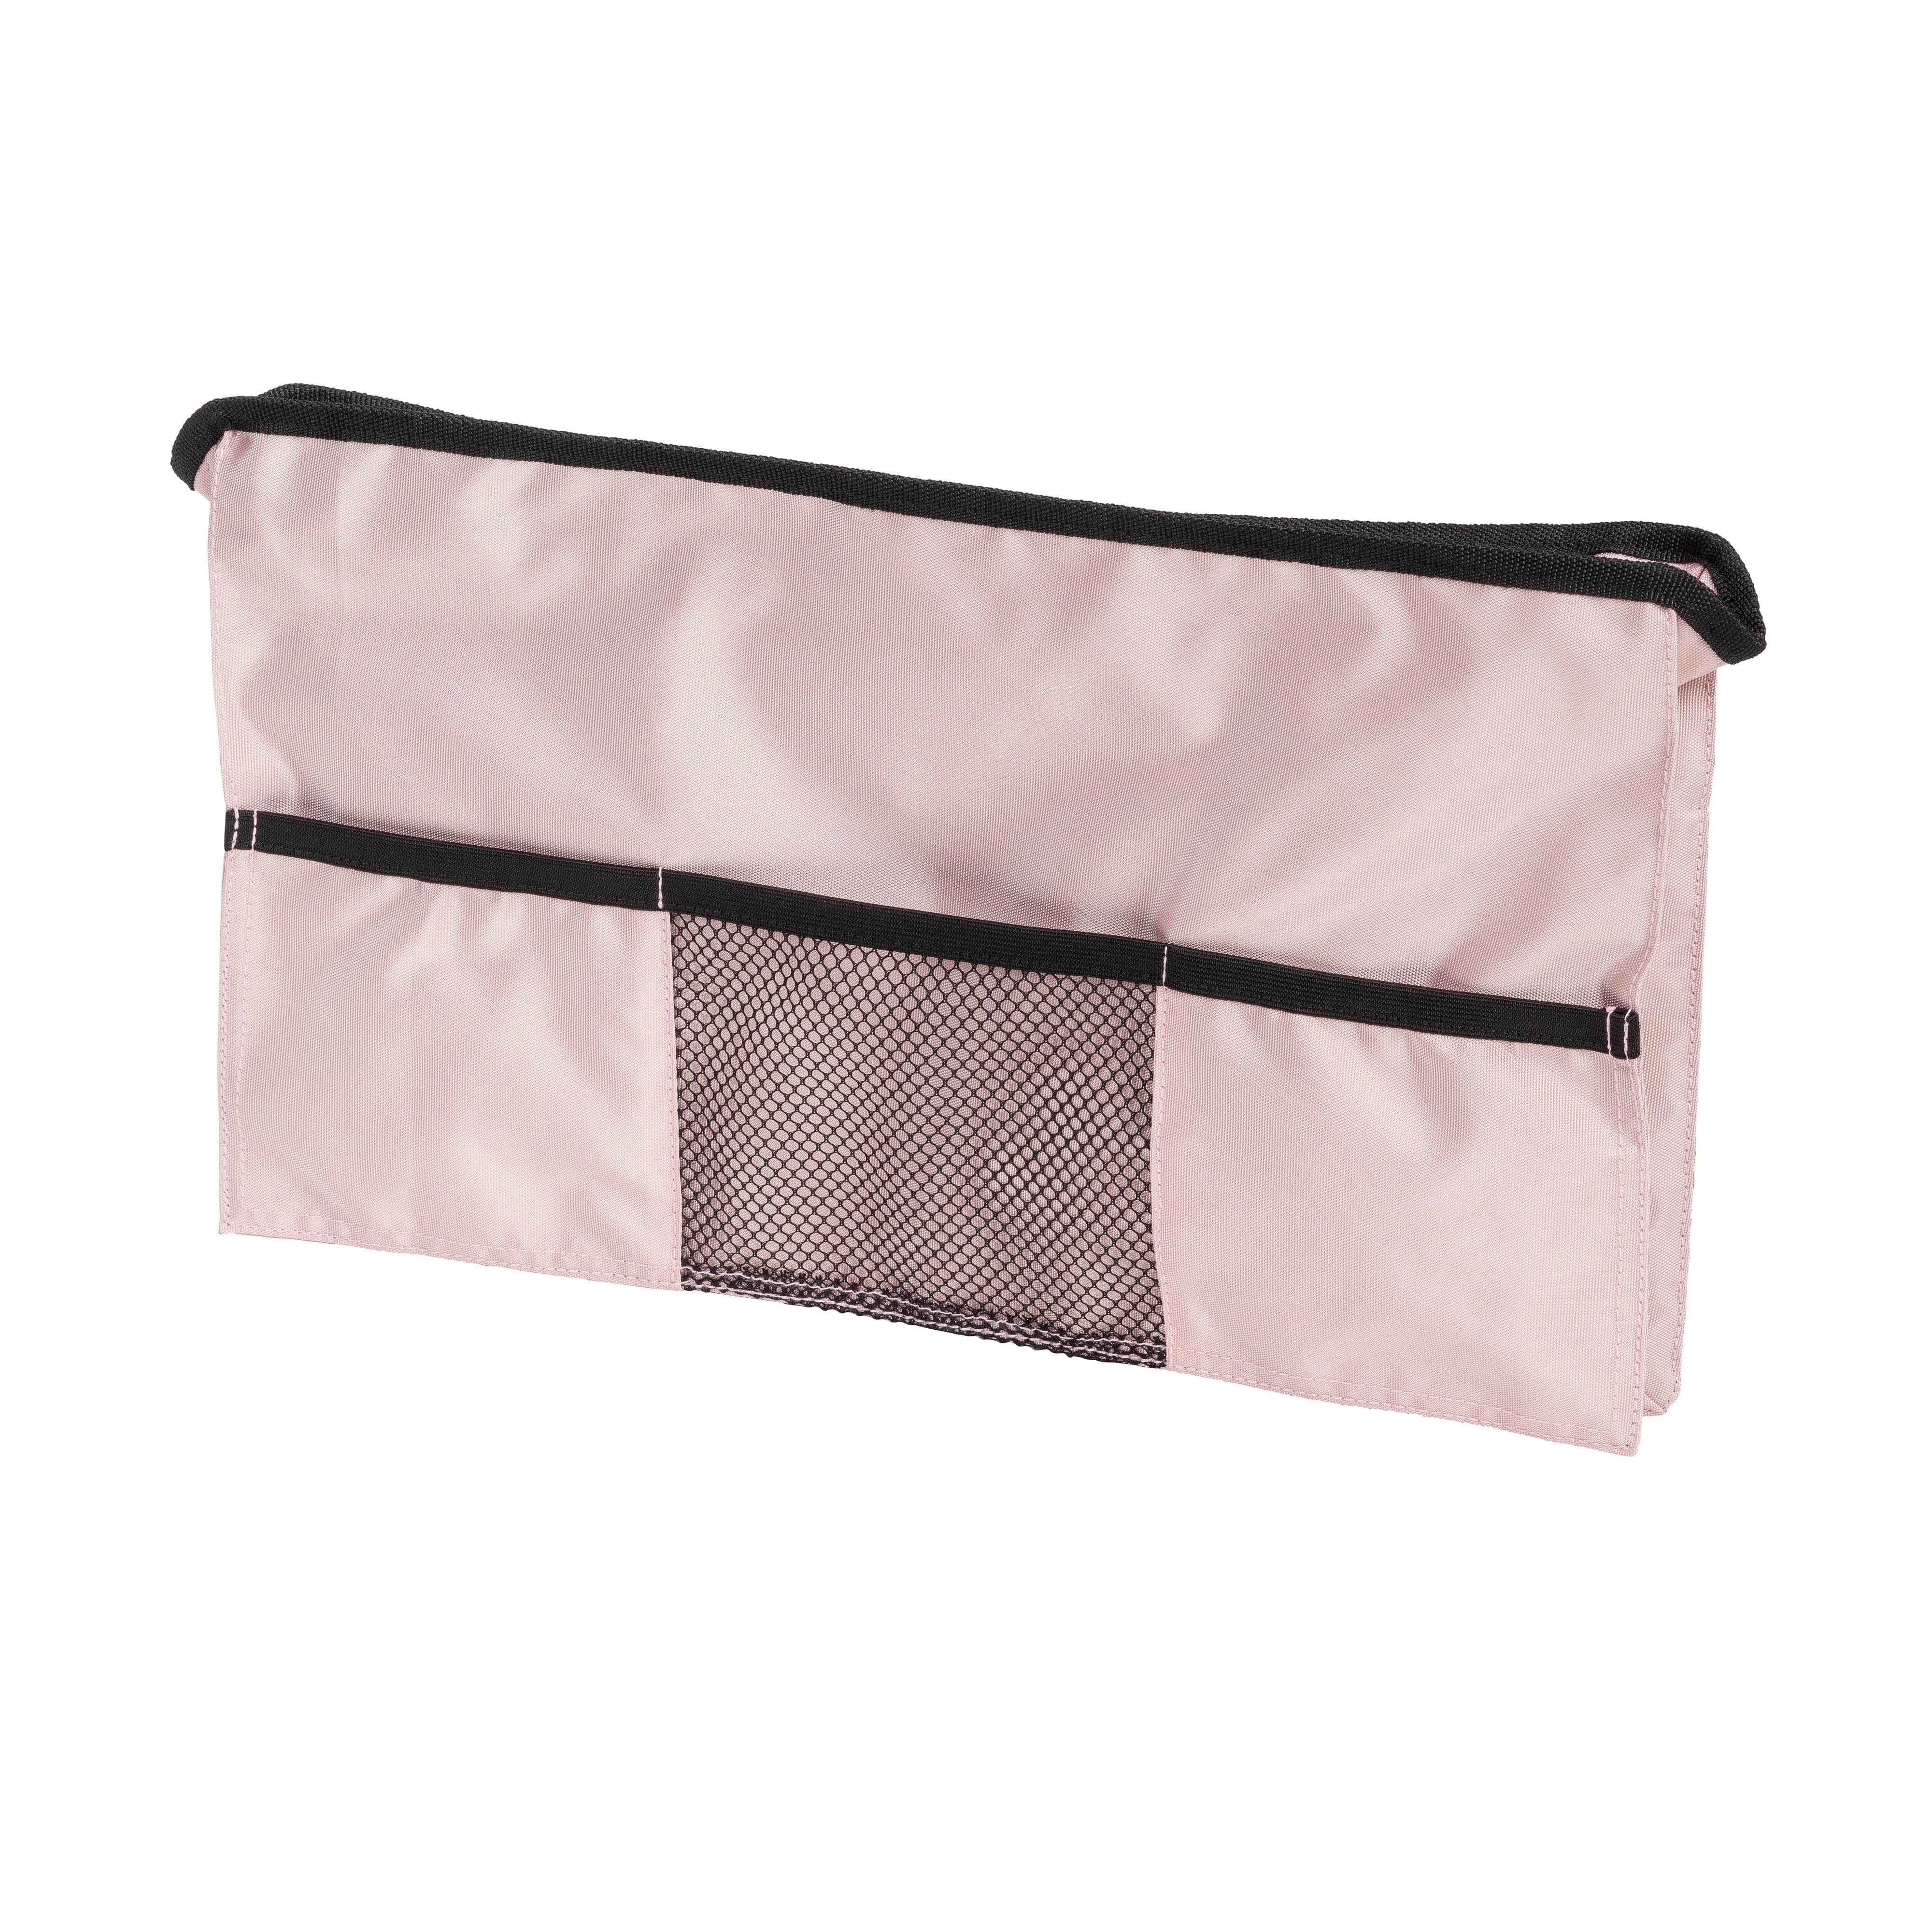 Drive Medical Walkers/Walker Accessories/Walker Carry Pouches and Baskets Pink Drive Medical Walker Accessory Bag